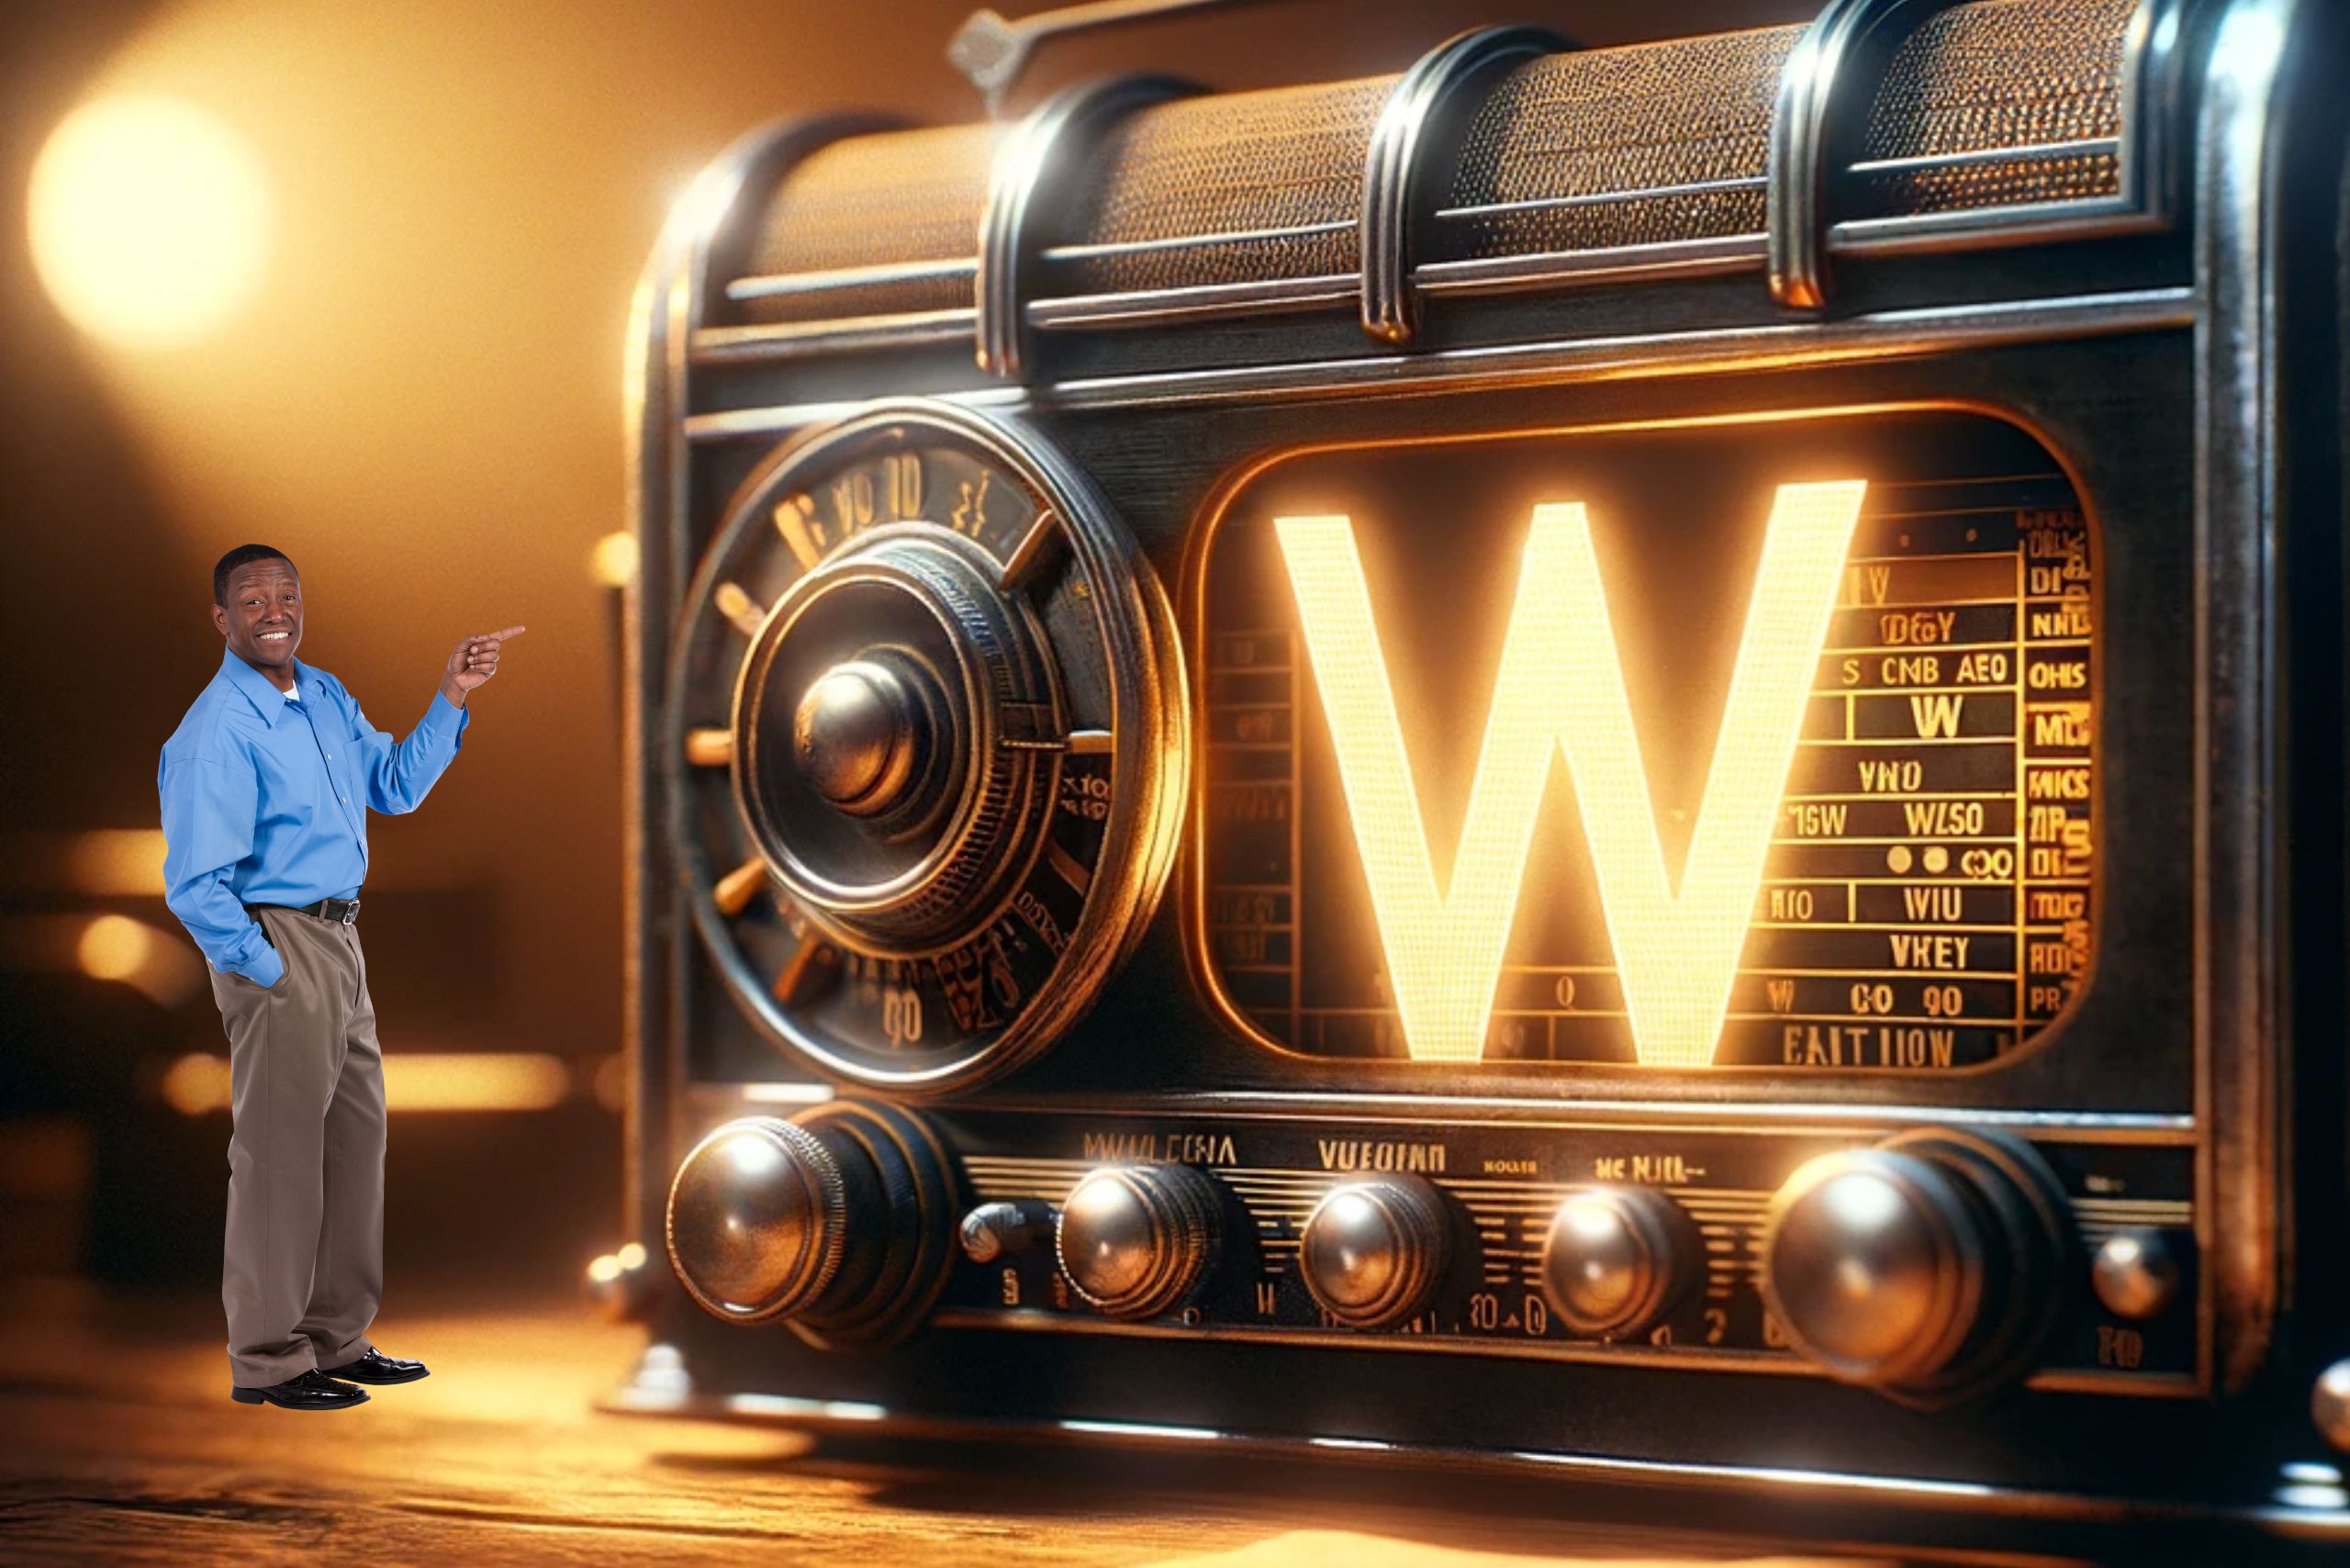 Why Do Radio Stations Start With W? The Mystery Explained